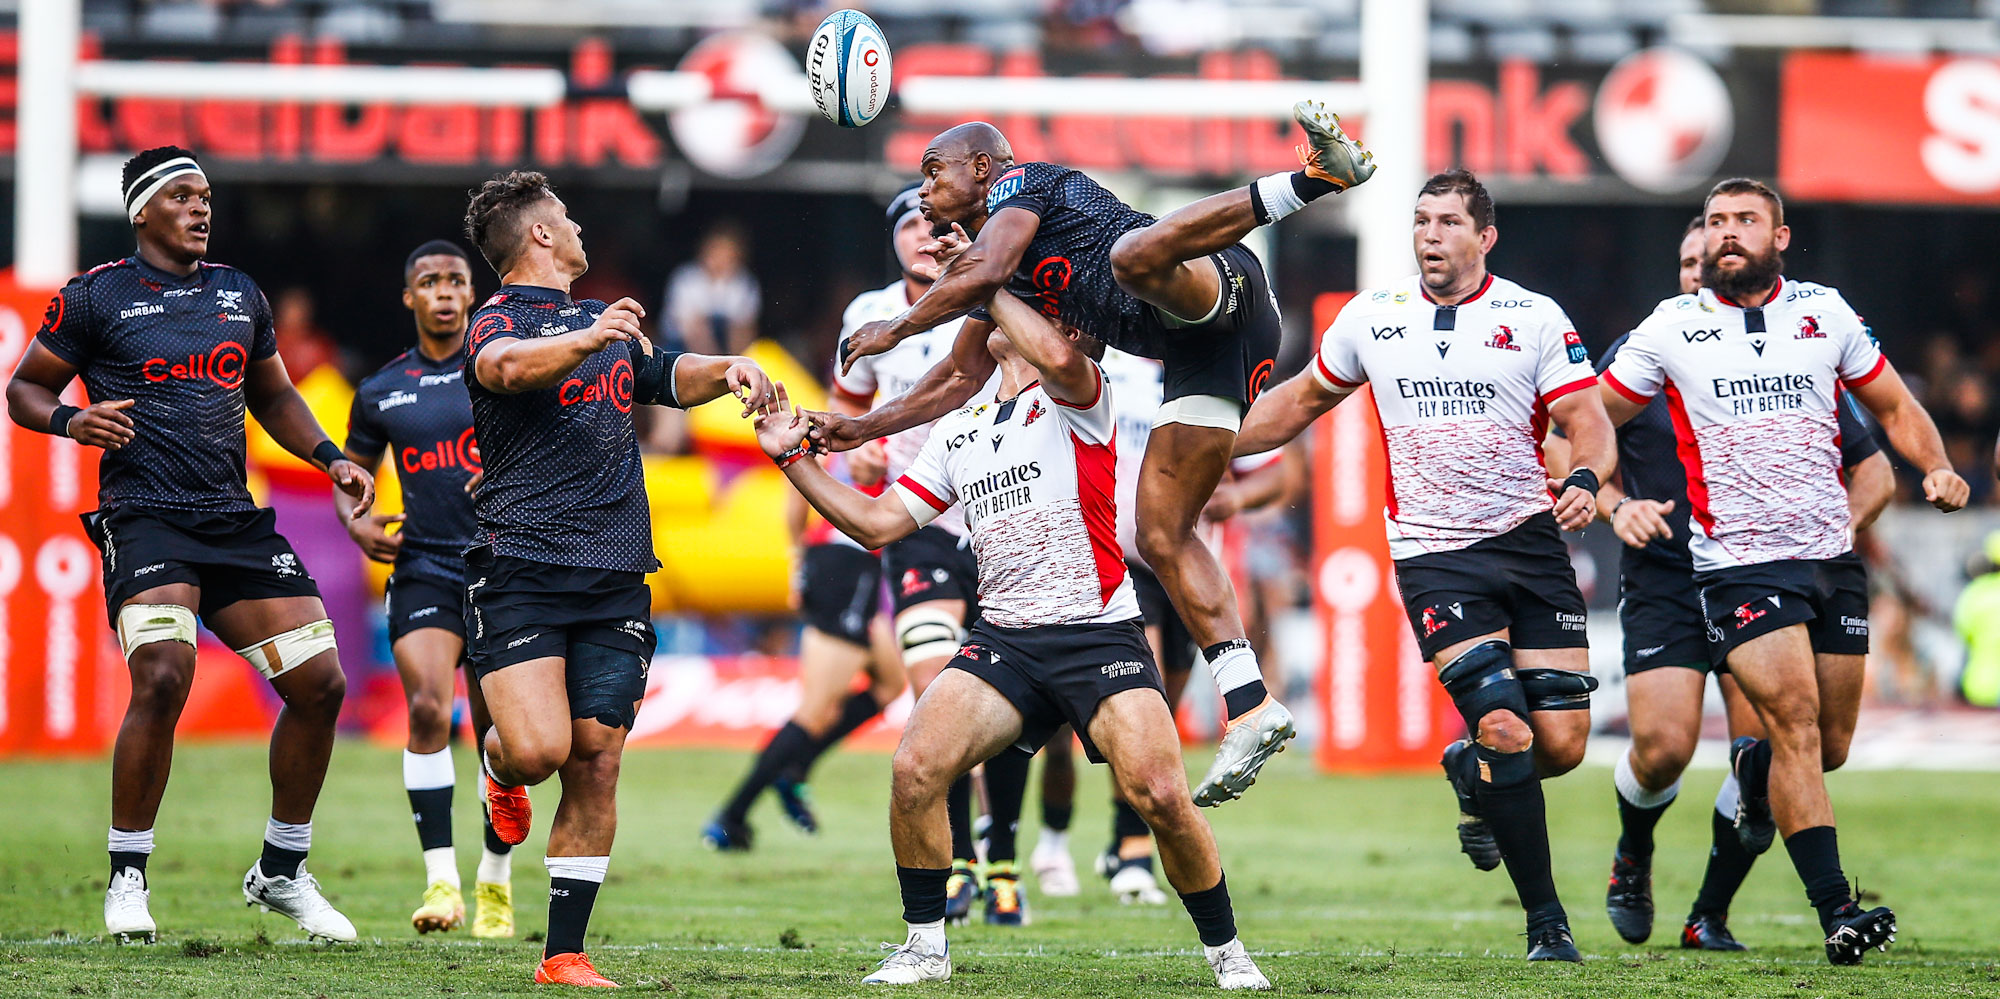 Action from the last time the Cell C Sharks and Emirates Lions met in the Vodacom URC.